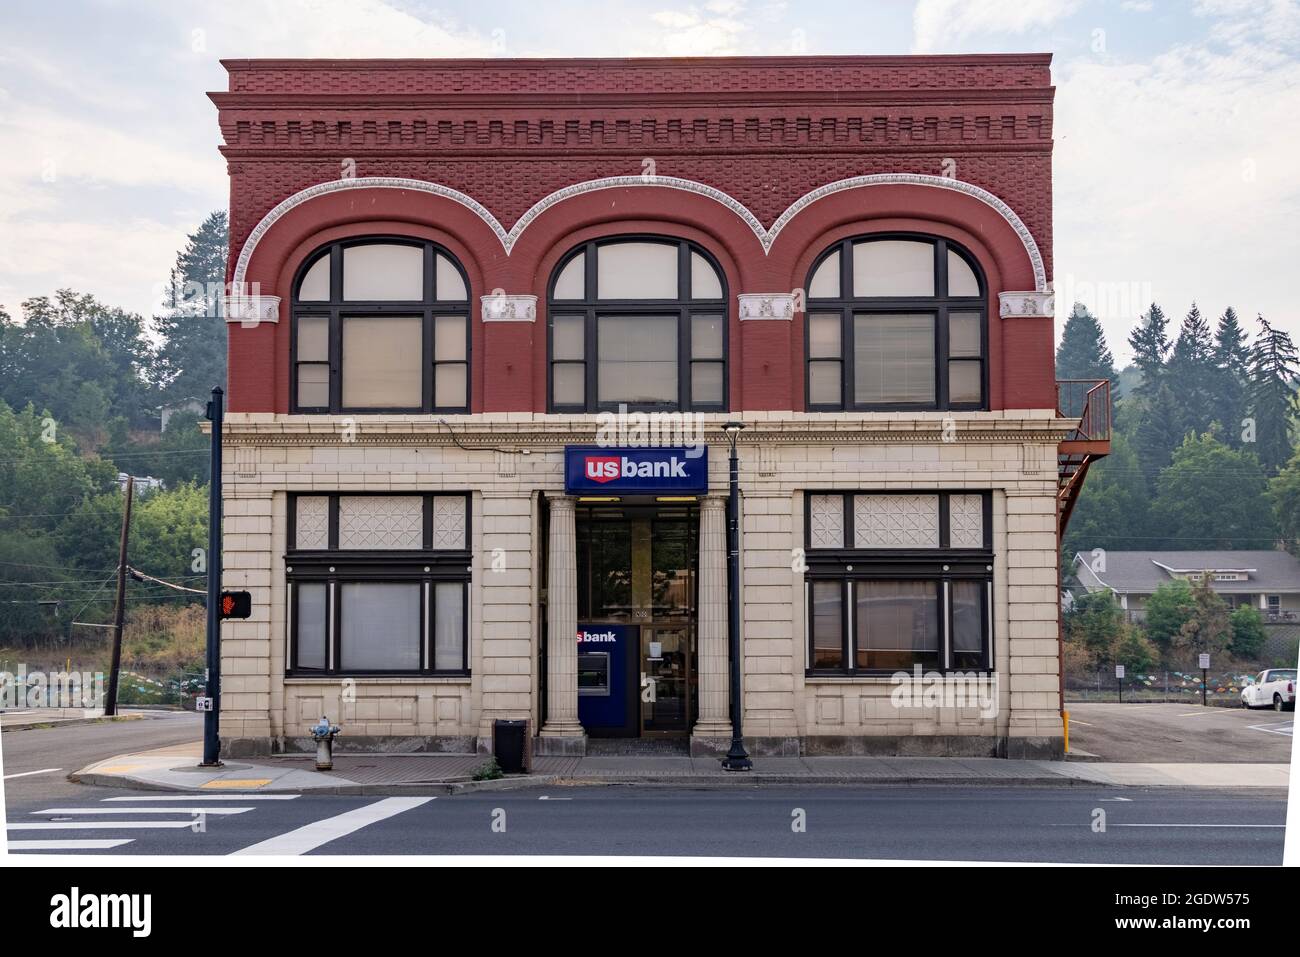 US bank branch in reused store next to empty parking lot, Colfax, Washington State, USA Stock Photo